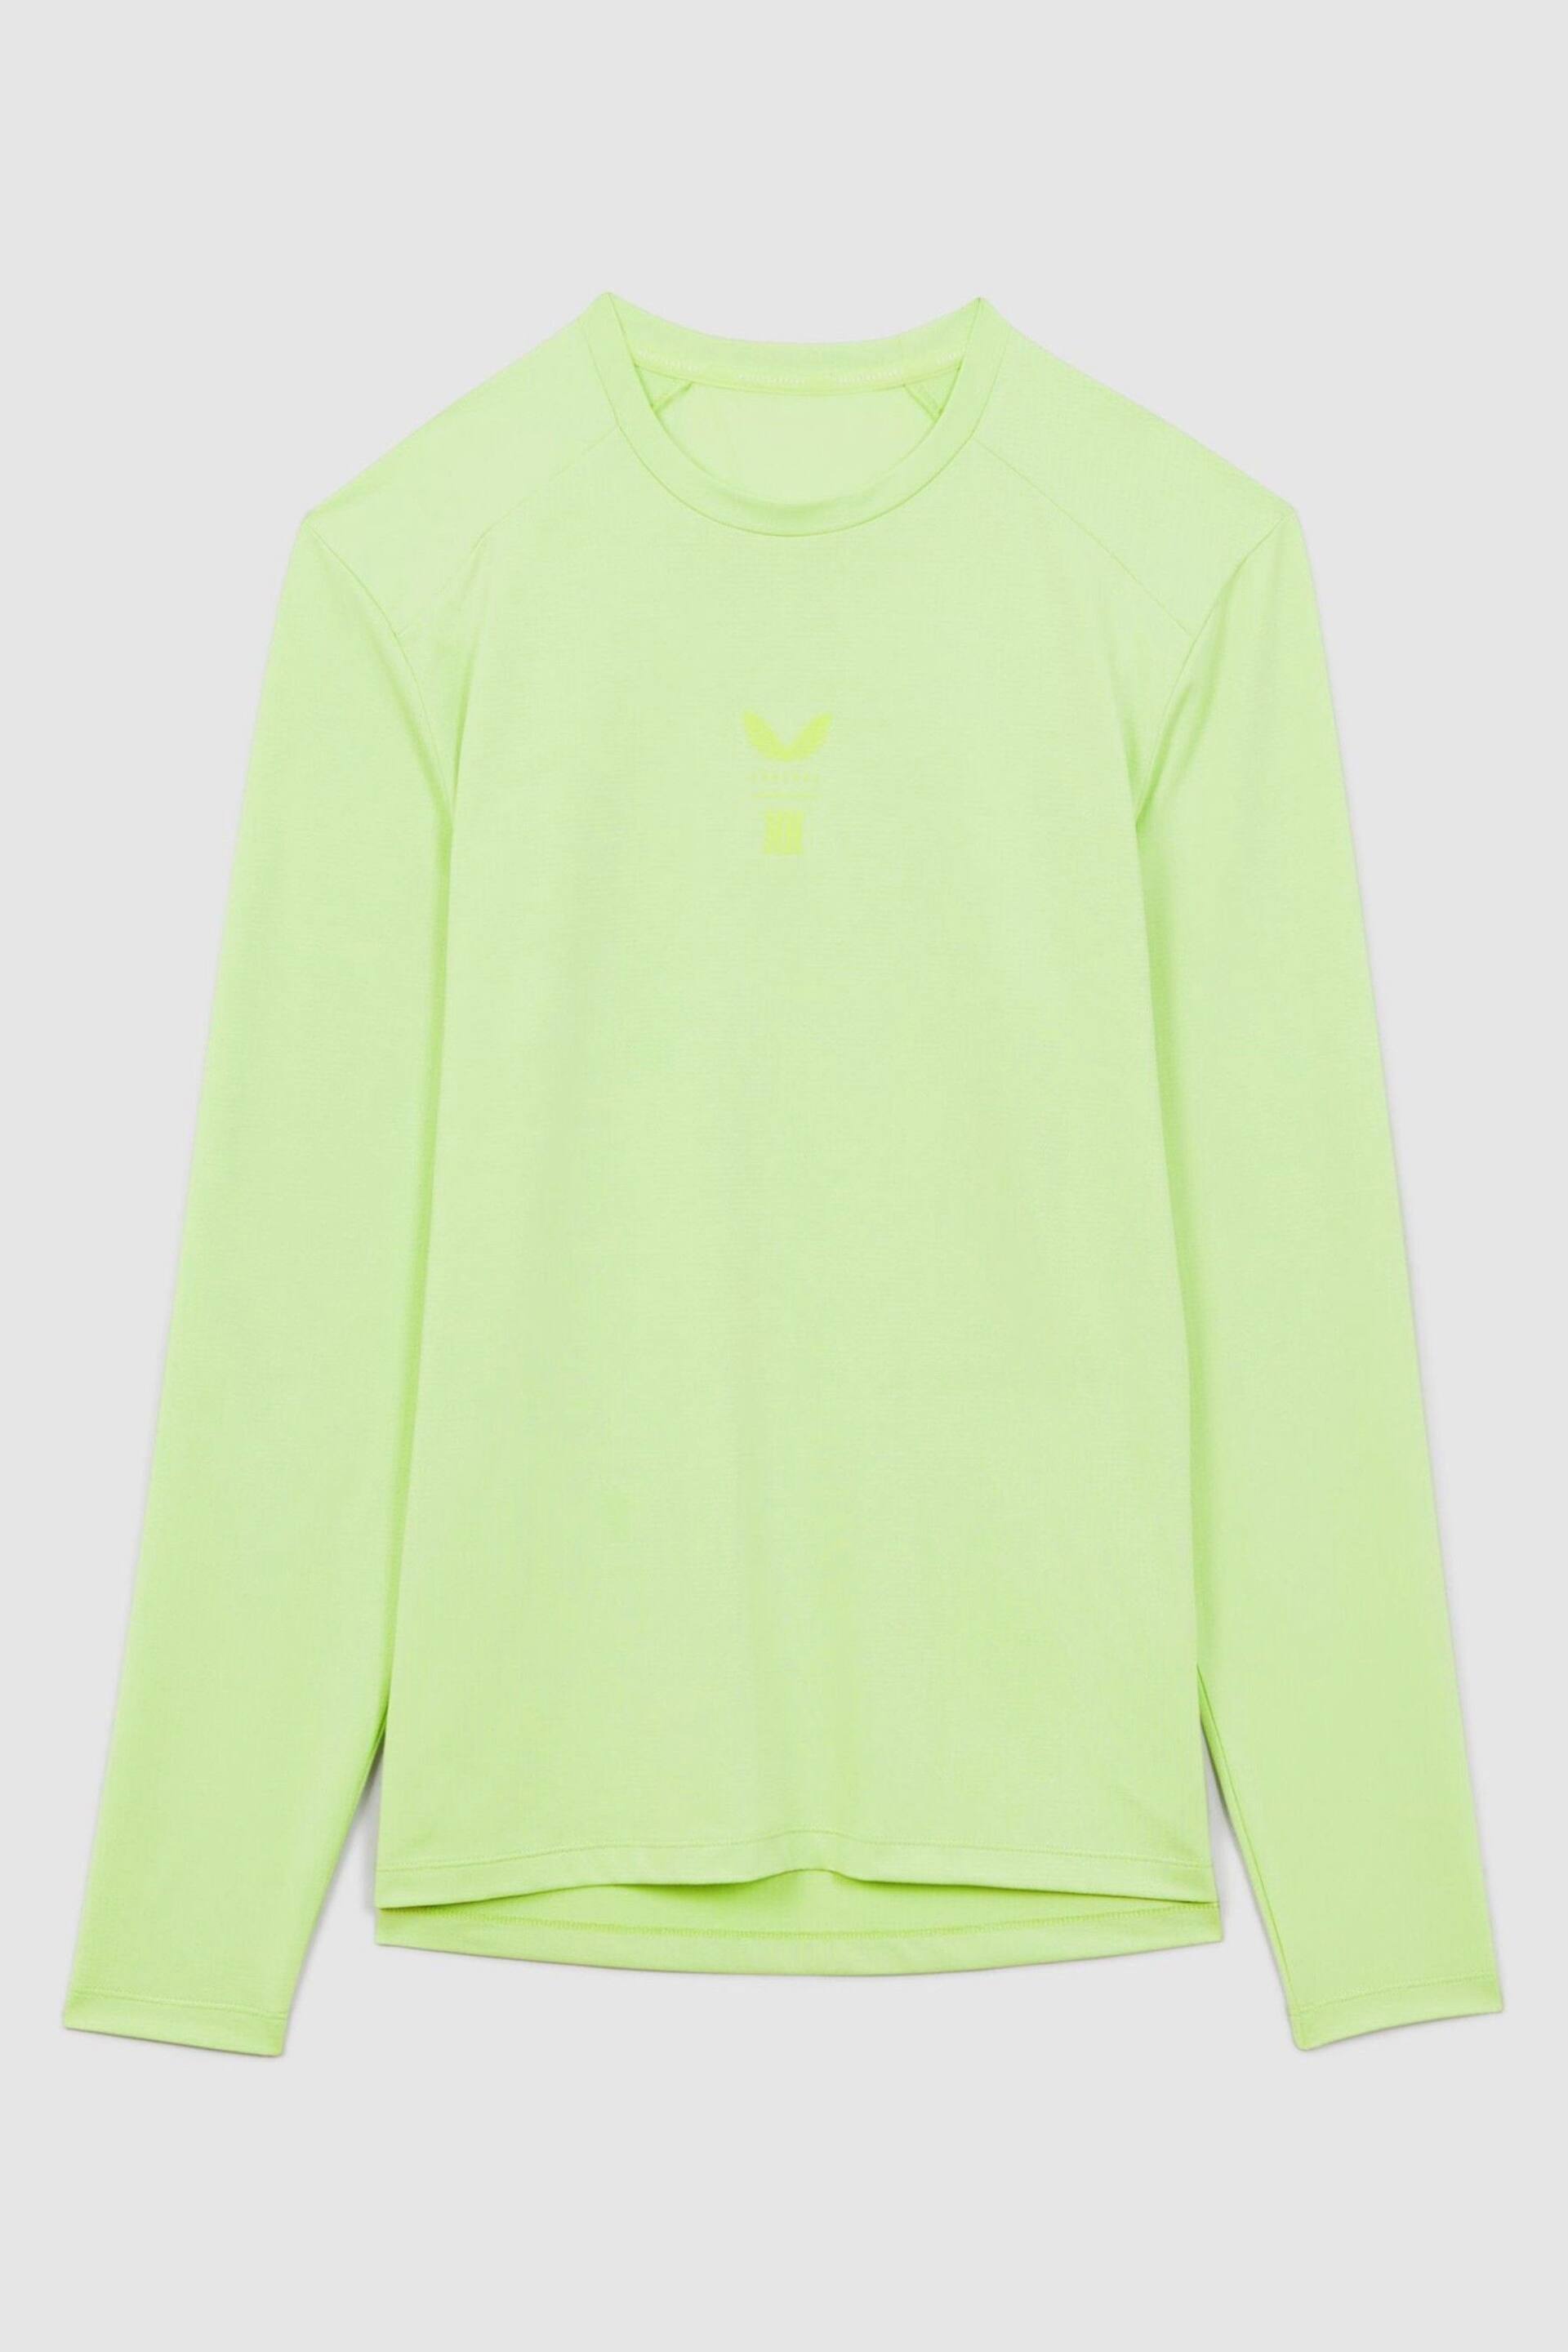 Reiss Iced Citrus Yellow Kash Castore Performance Long Sleeve Top - Image 2 of 9